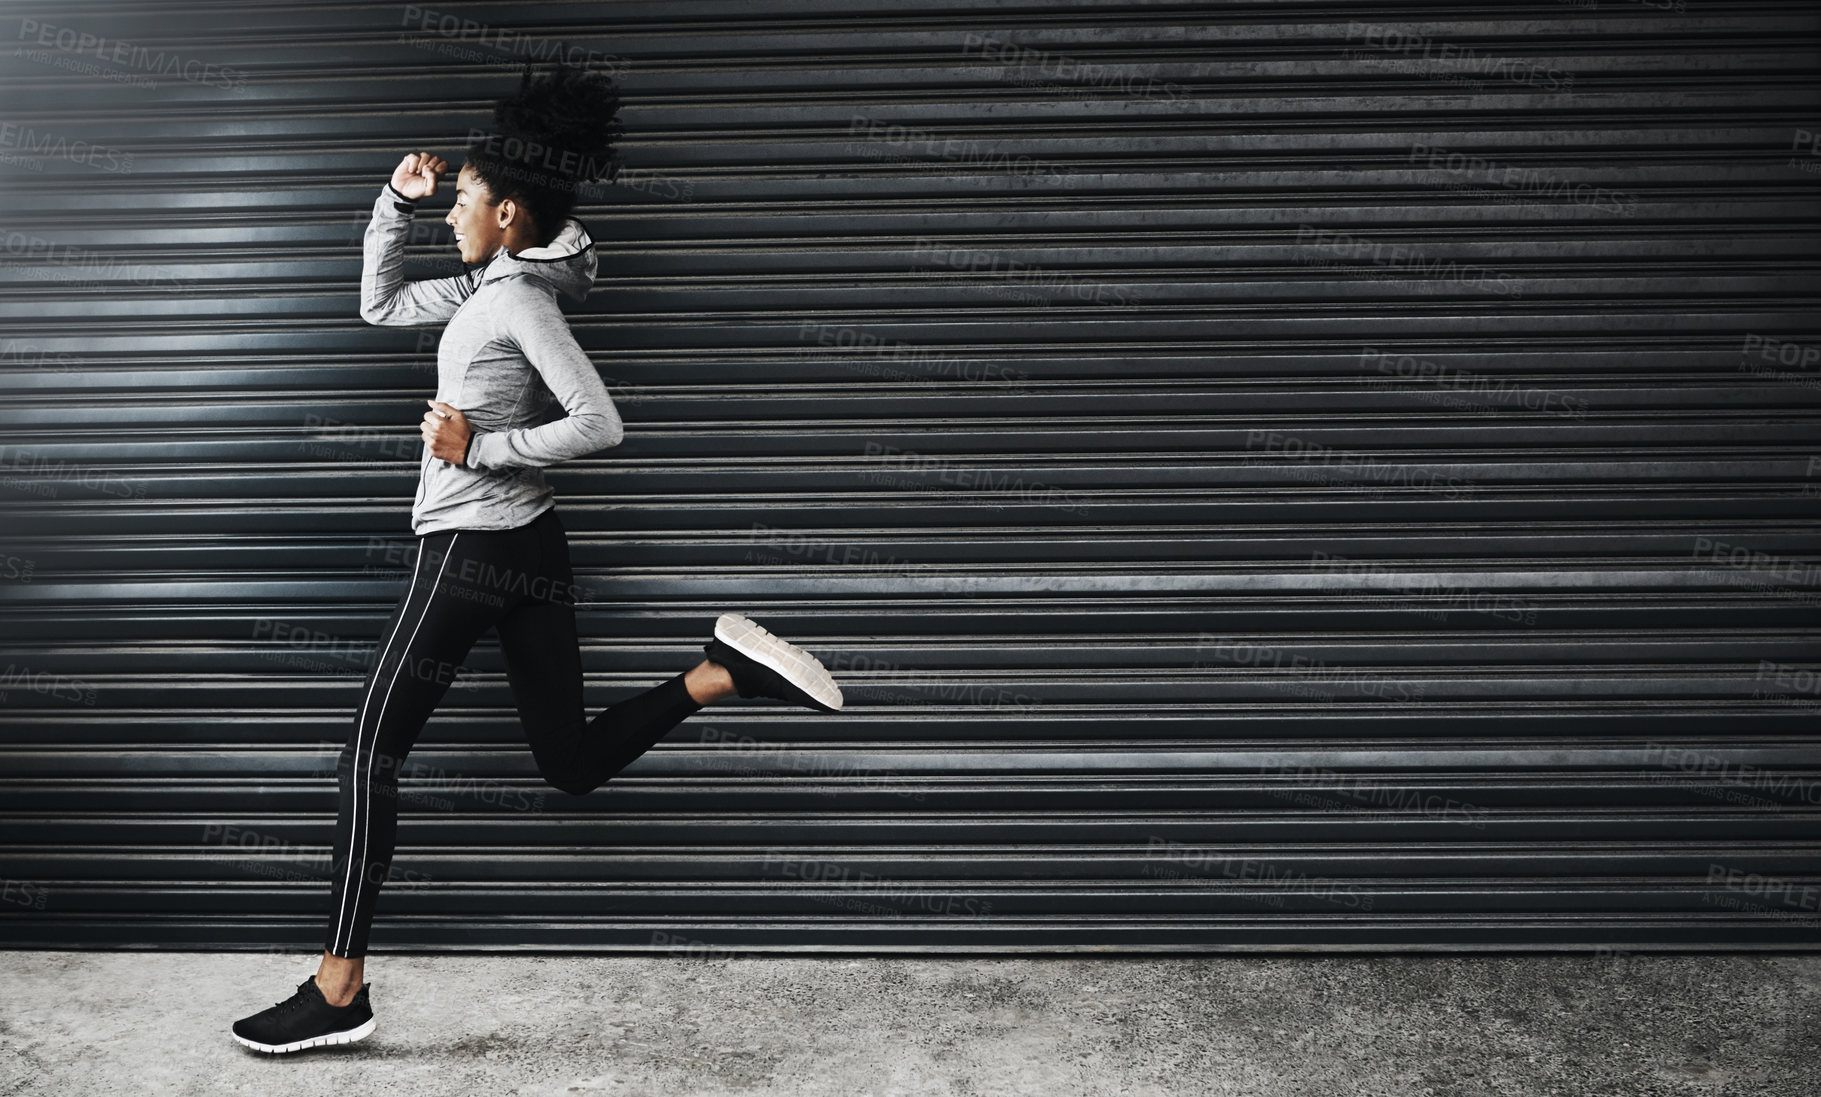 Buy stock photo Shot of a sporty young woman running against a grey background